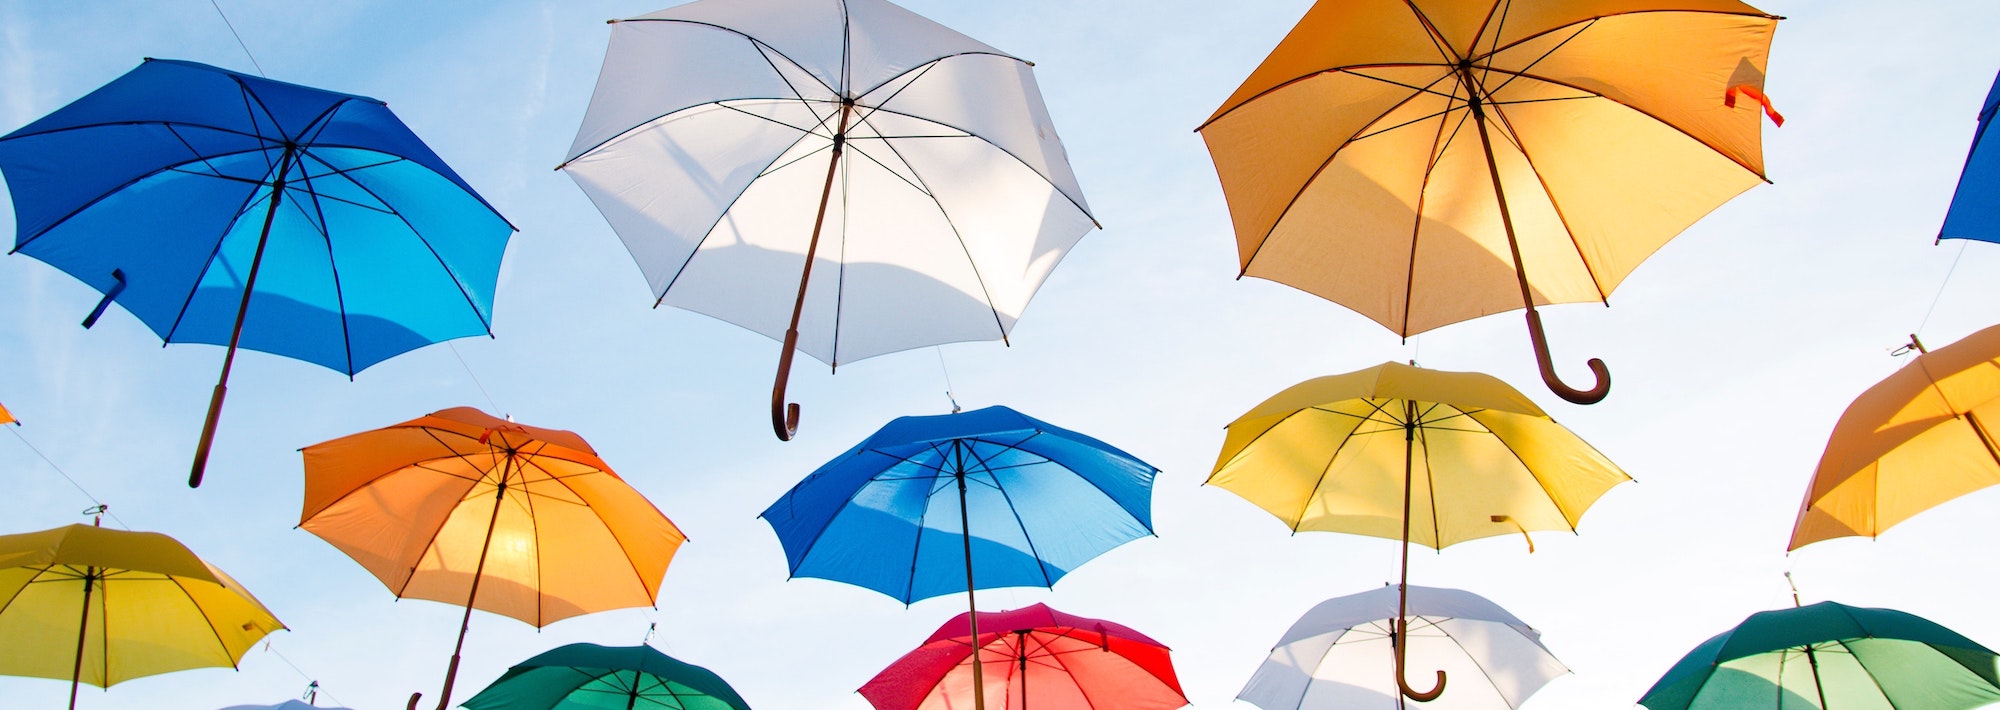 multi-colored umbrellas floating in a blue sky